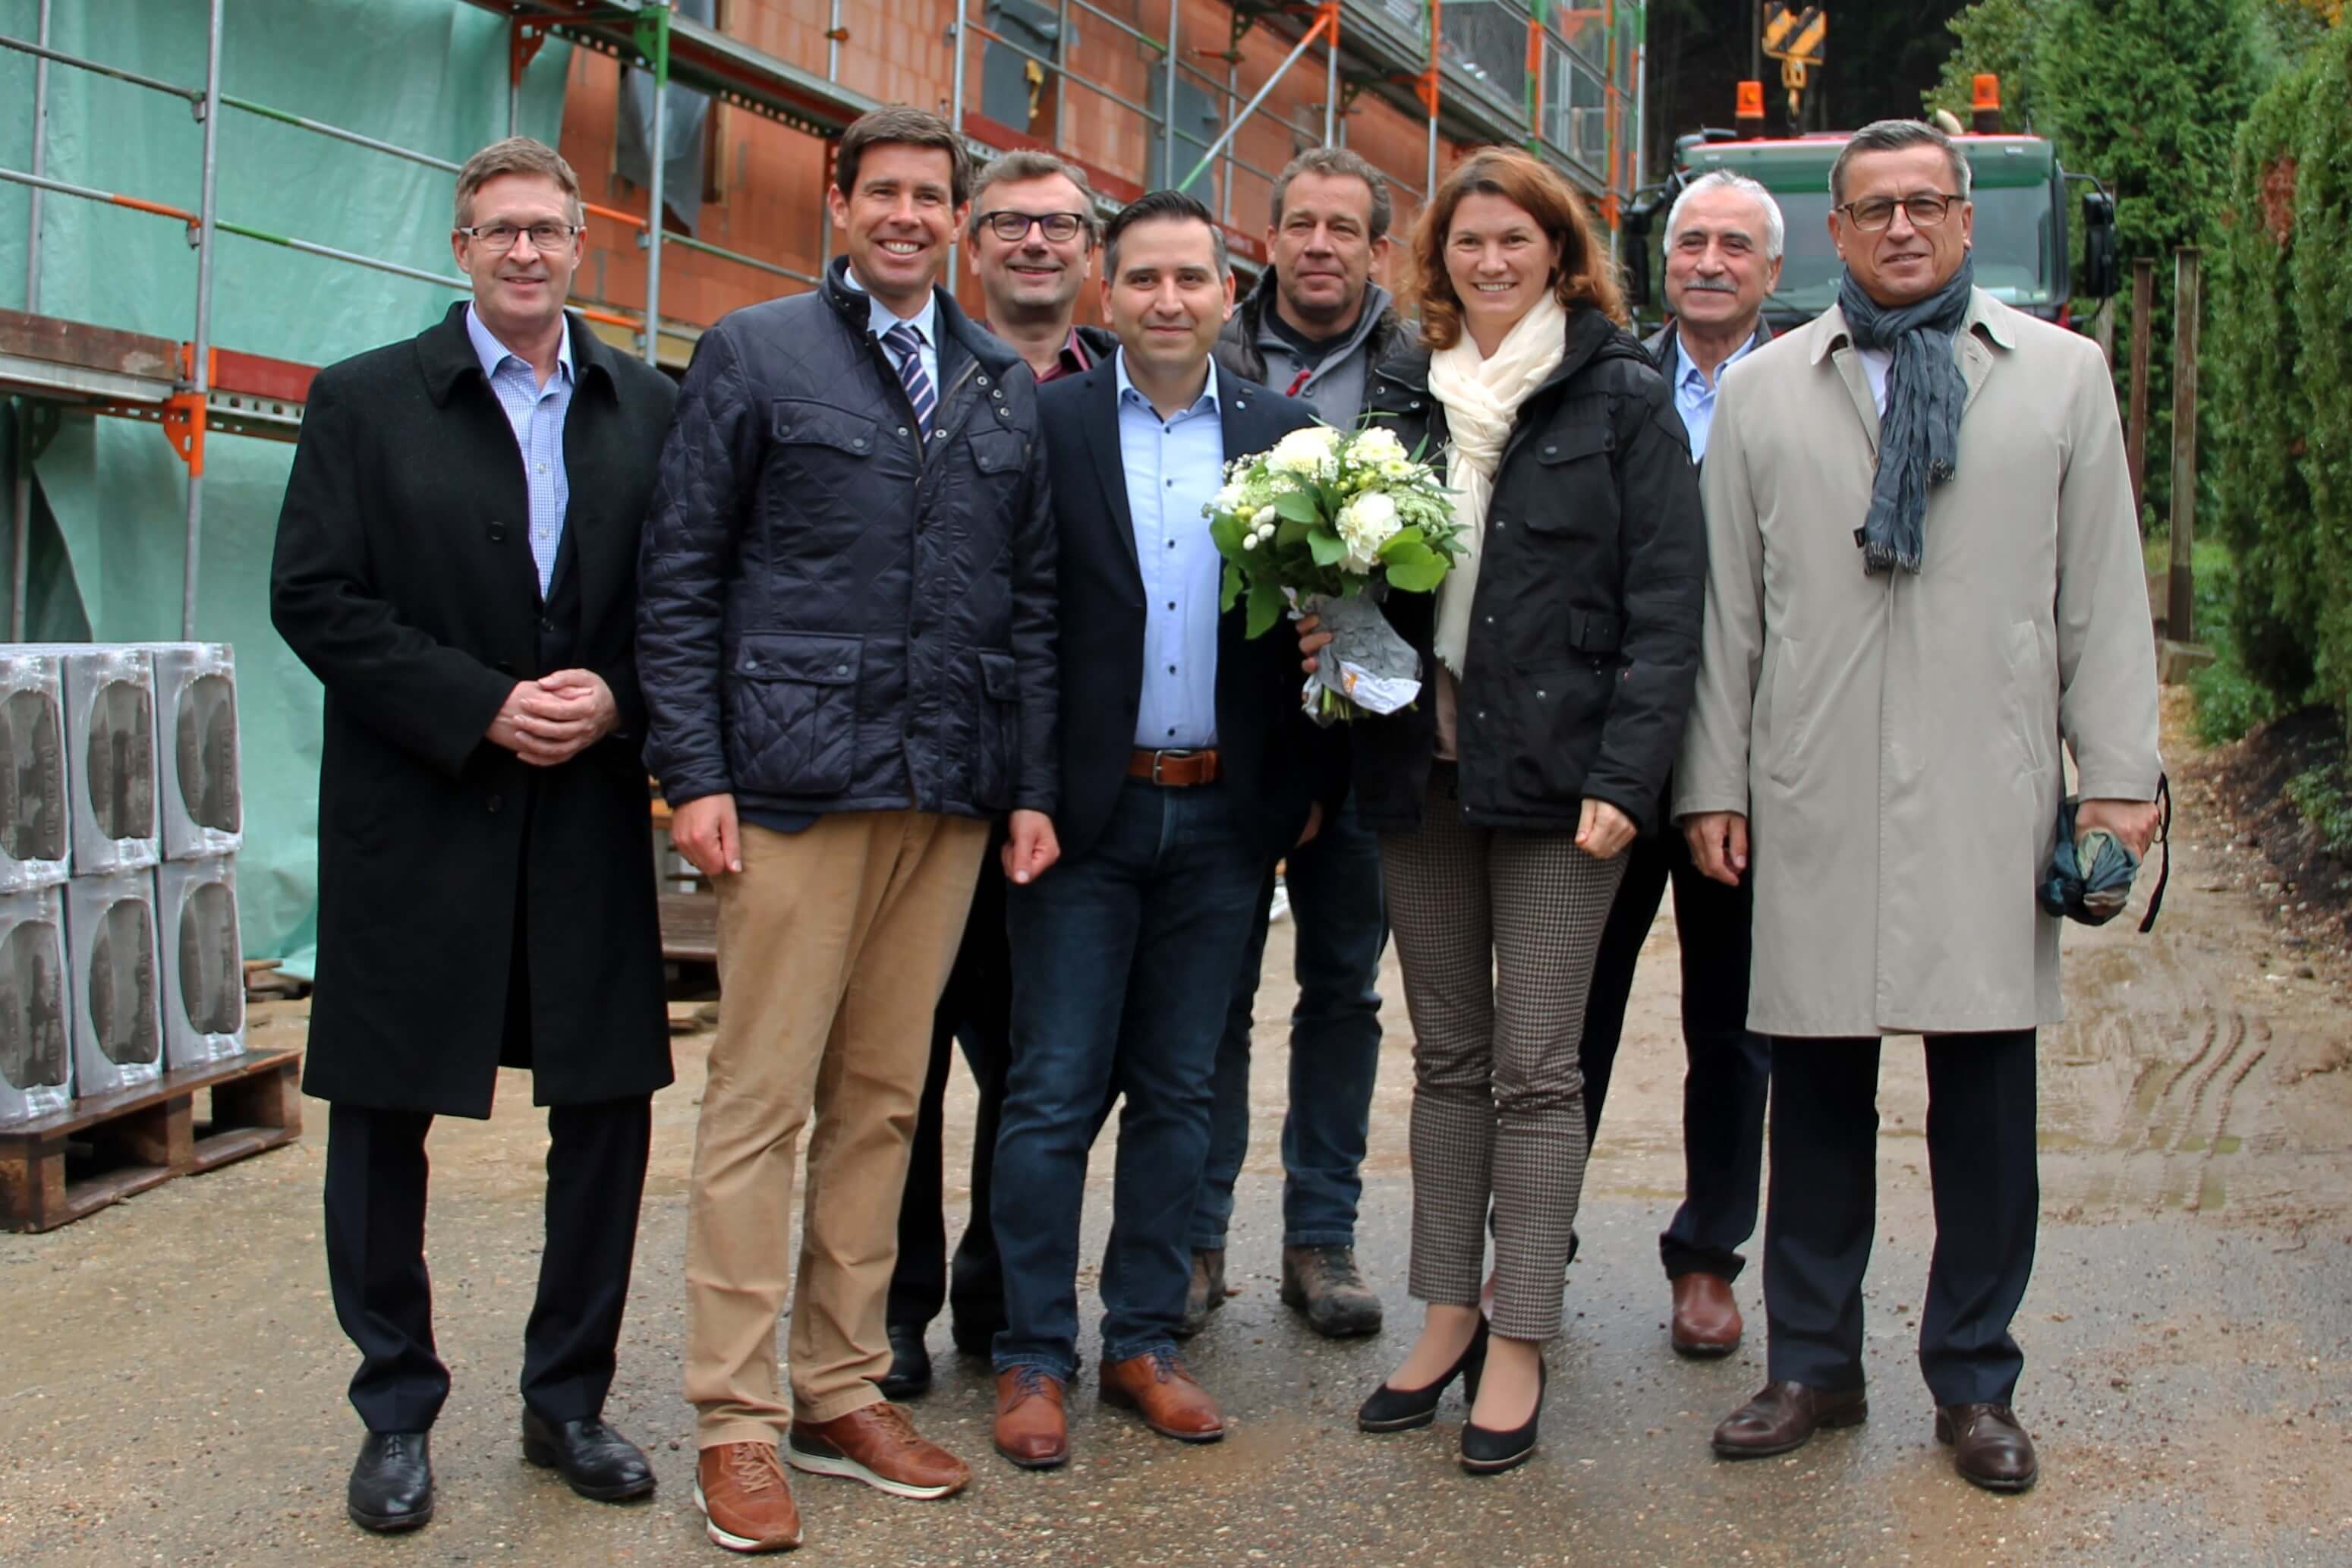 Group photo in front of the bare brickwork of B-Horizon’s new headquarters at the topping-out ceremony in Sinzing Front row: Johannes Seibert (Managing Partner at CDM Global Solutions), Patrick Grossmann (1st Mayor of Sinzing), Mohammad Kabany (Founder and CEO B-Horizon GmbH), Tanja Schweiger (District Administrator of the District Regensburg), Gerhard Heinemann (Vice President Purchasing and SQA at CATL Europa) Back row: Dr. Martin Kammerer (Managing Director of IHK-Gremium Regensburg), Armin Zeiler (Builder), M. Taleb Kabbani (Consultant of B-Horizon GmbH)